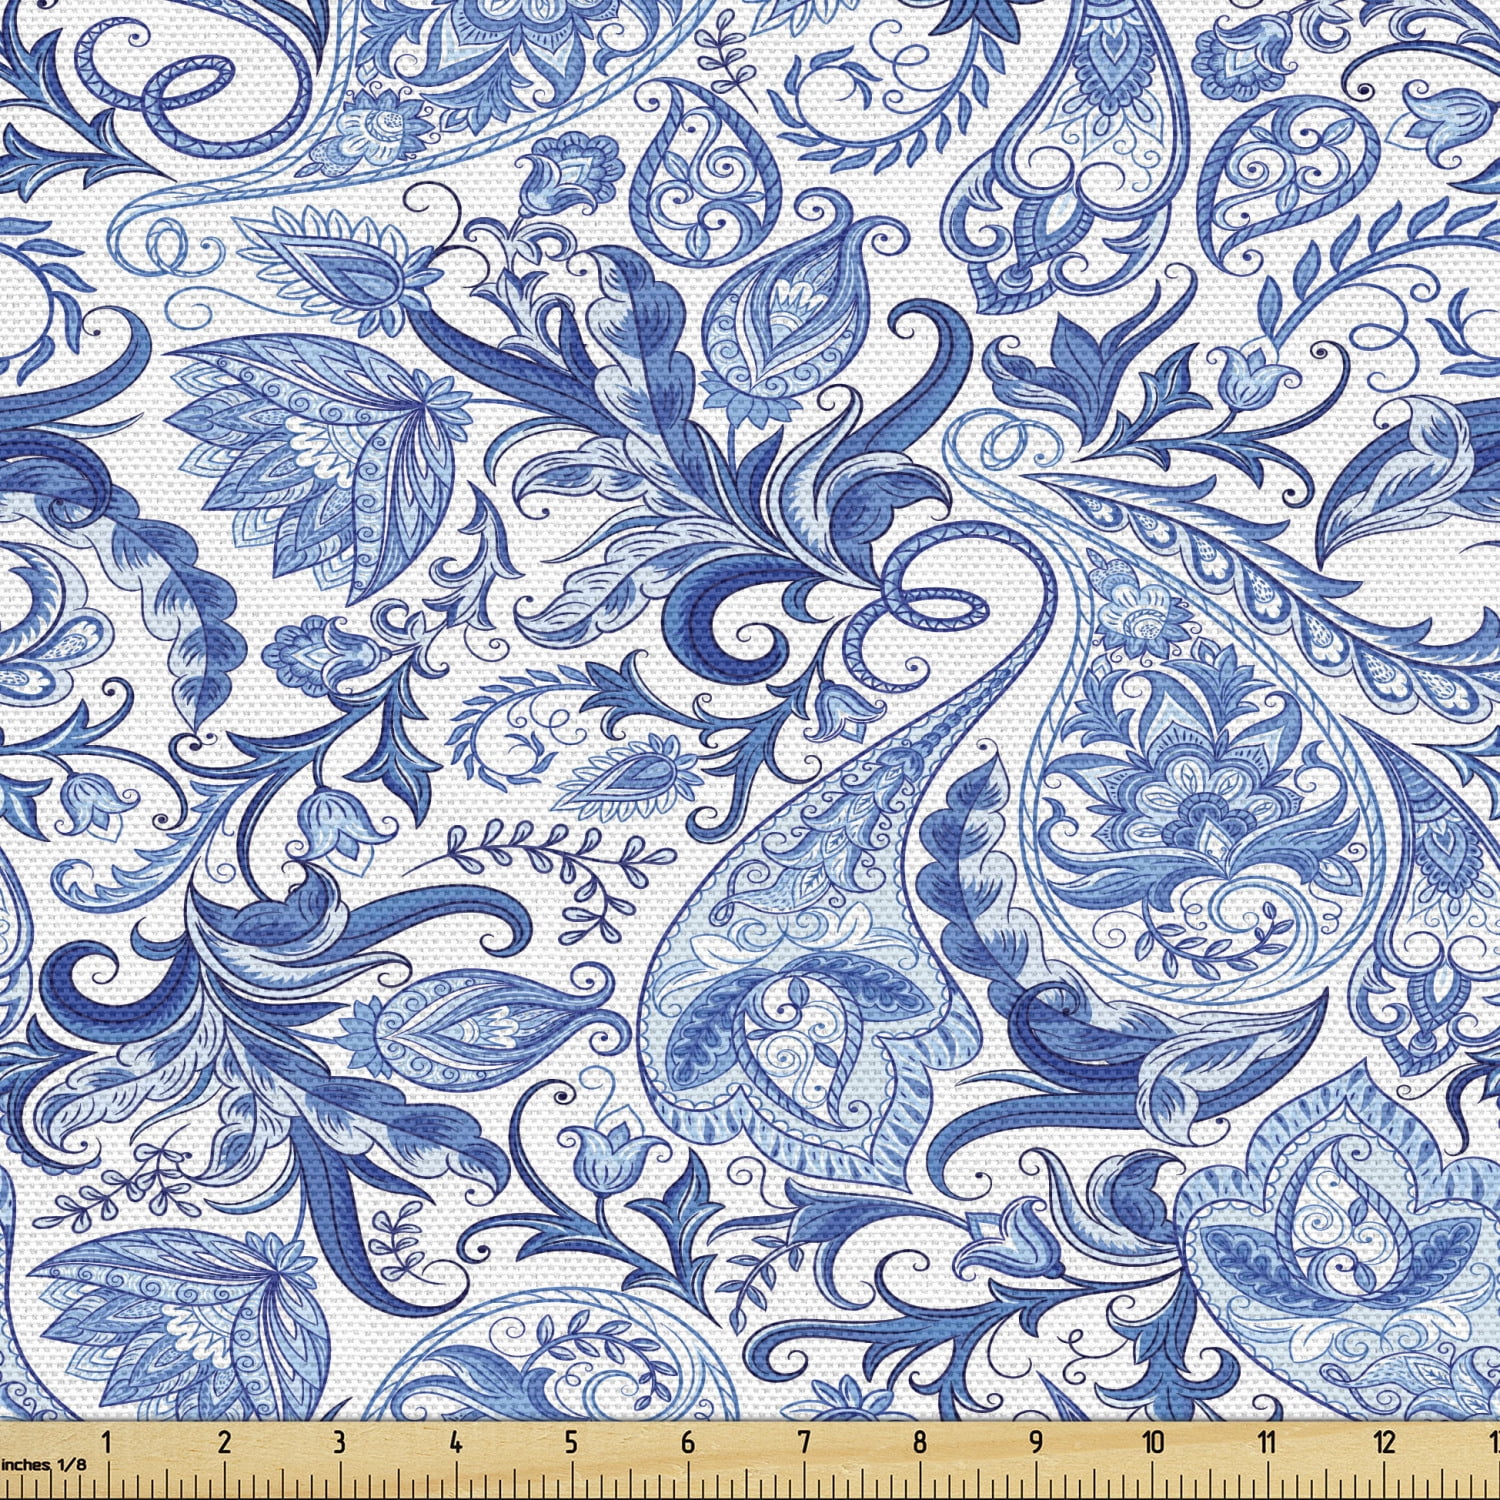 Paisley Fabric By The Yard Native Pattern In Blue Tones Nature Themed